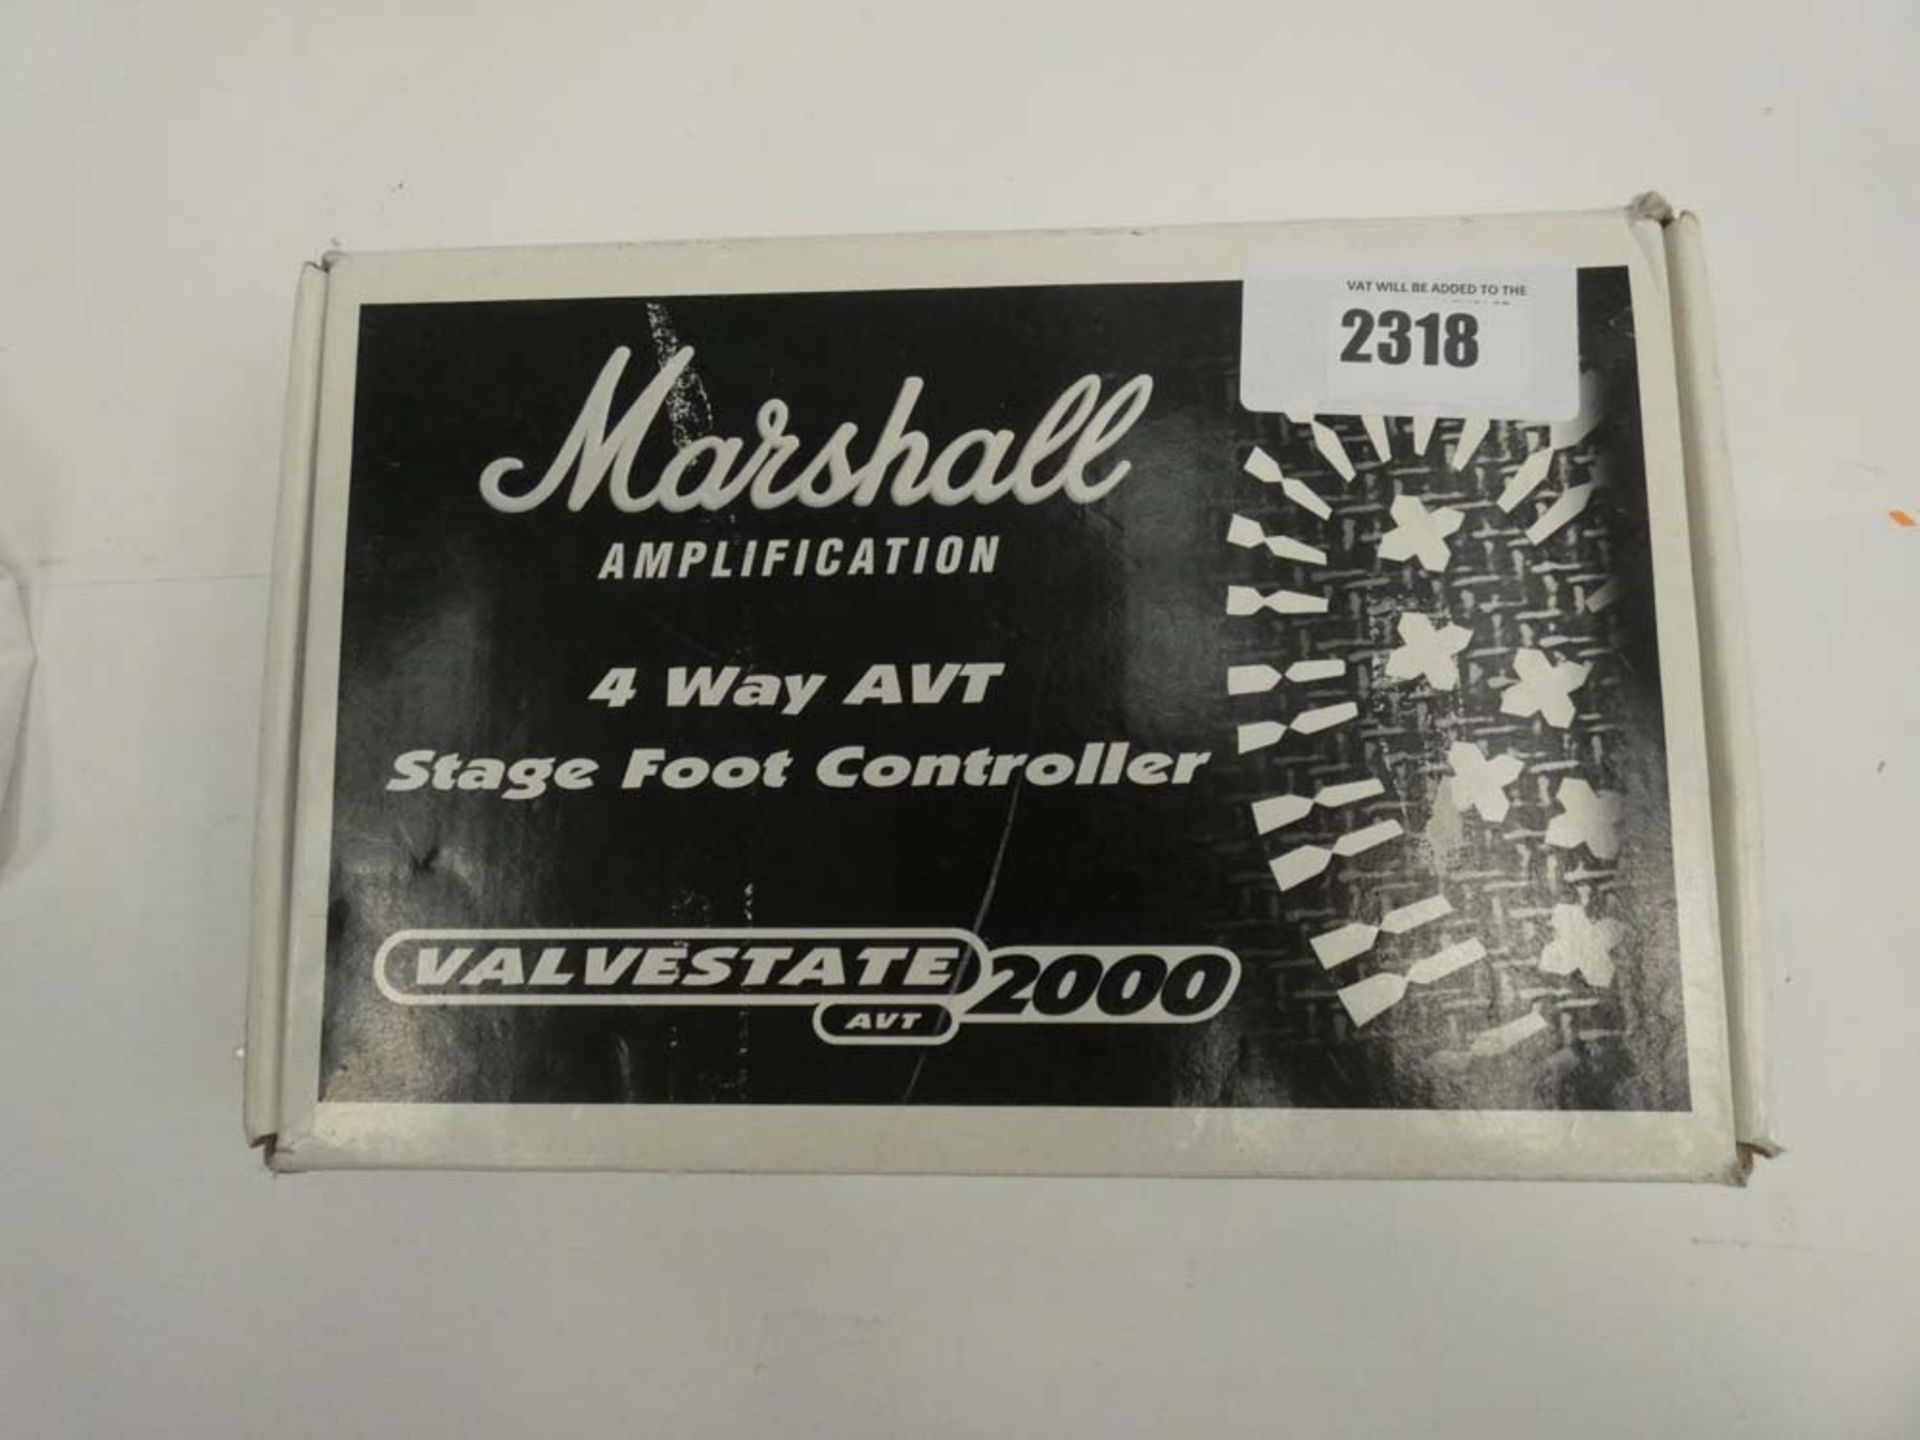 Marshall 4 Way AVT stage foot controller